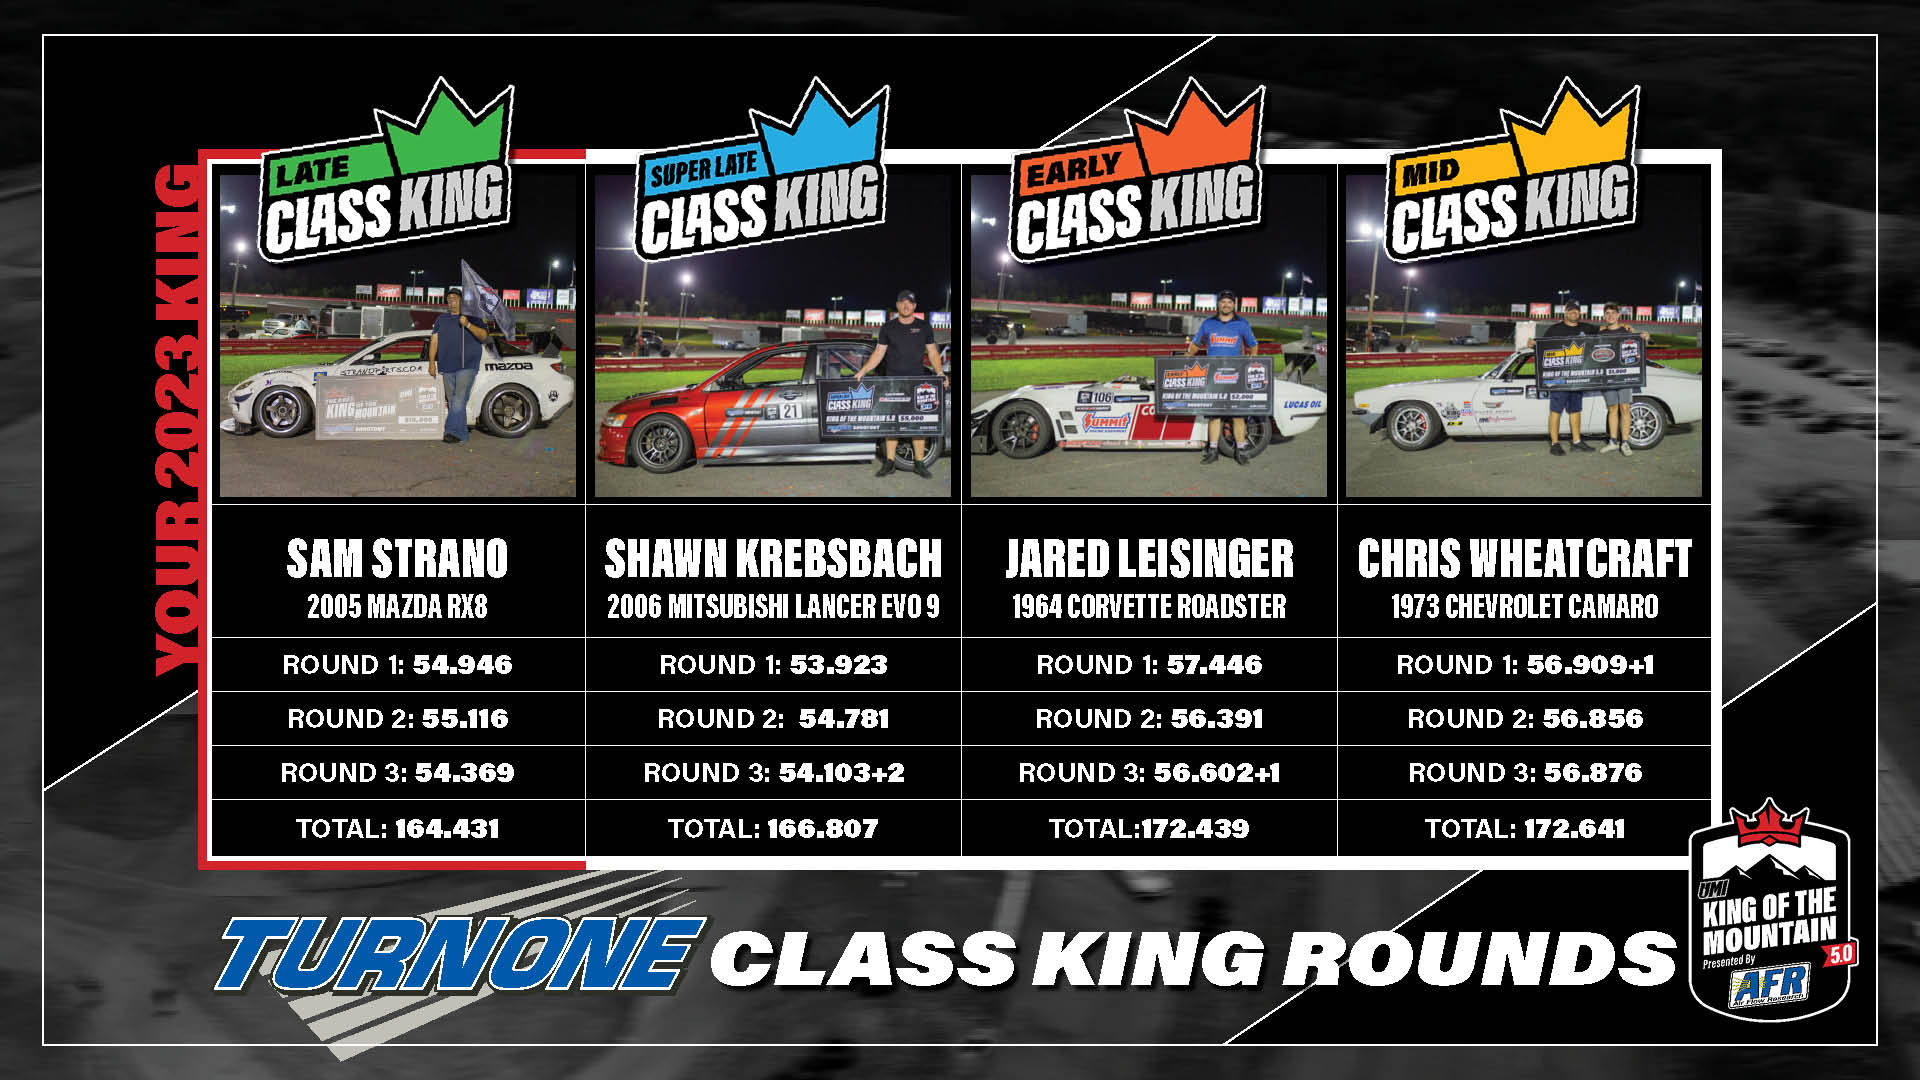 A flyer for the class king rounds.